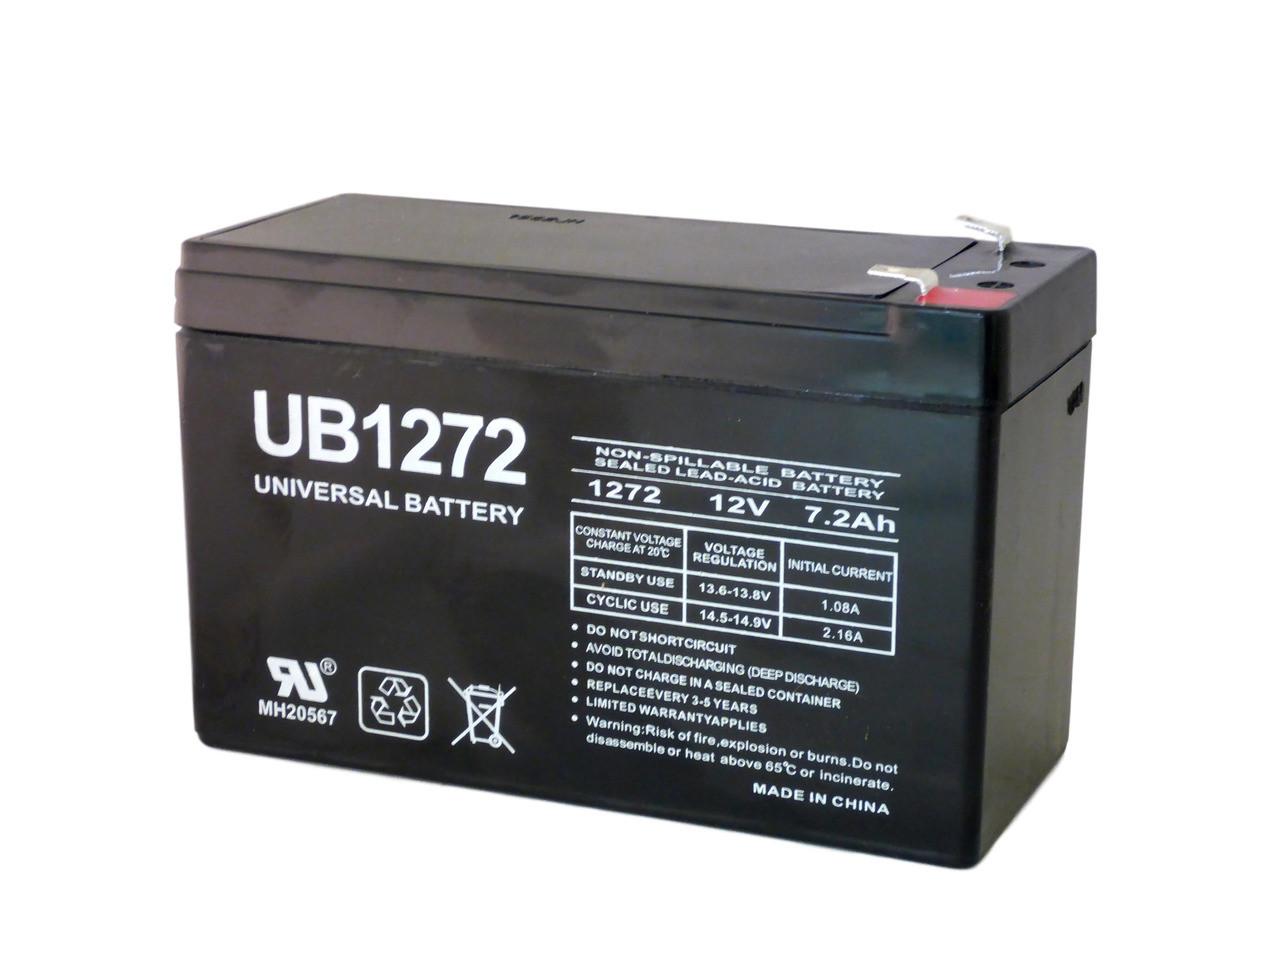 Gp1272 f2 12v. CSB Battery co GP 1272 f2. Аккумулятор wbr gp1272 f2 12v/28w. Батарея f2fr 12v/7.2Ah. NP 2,6-12 fr 12v 2,6 Ah Sealed Rechargeable lead- acid Battery.